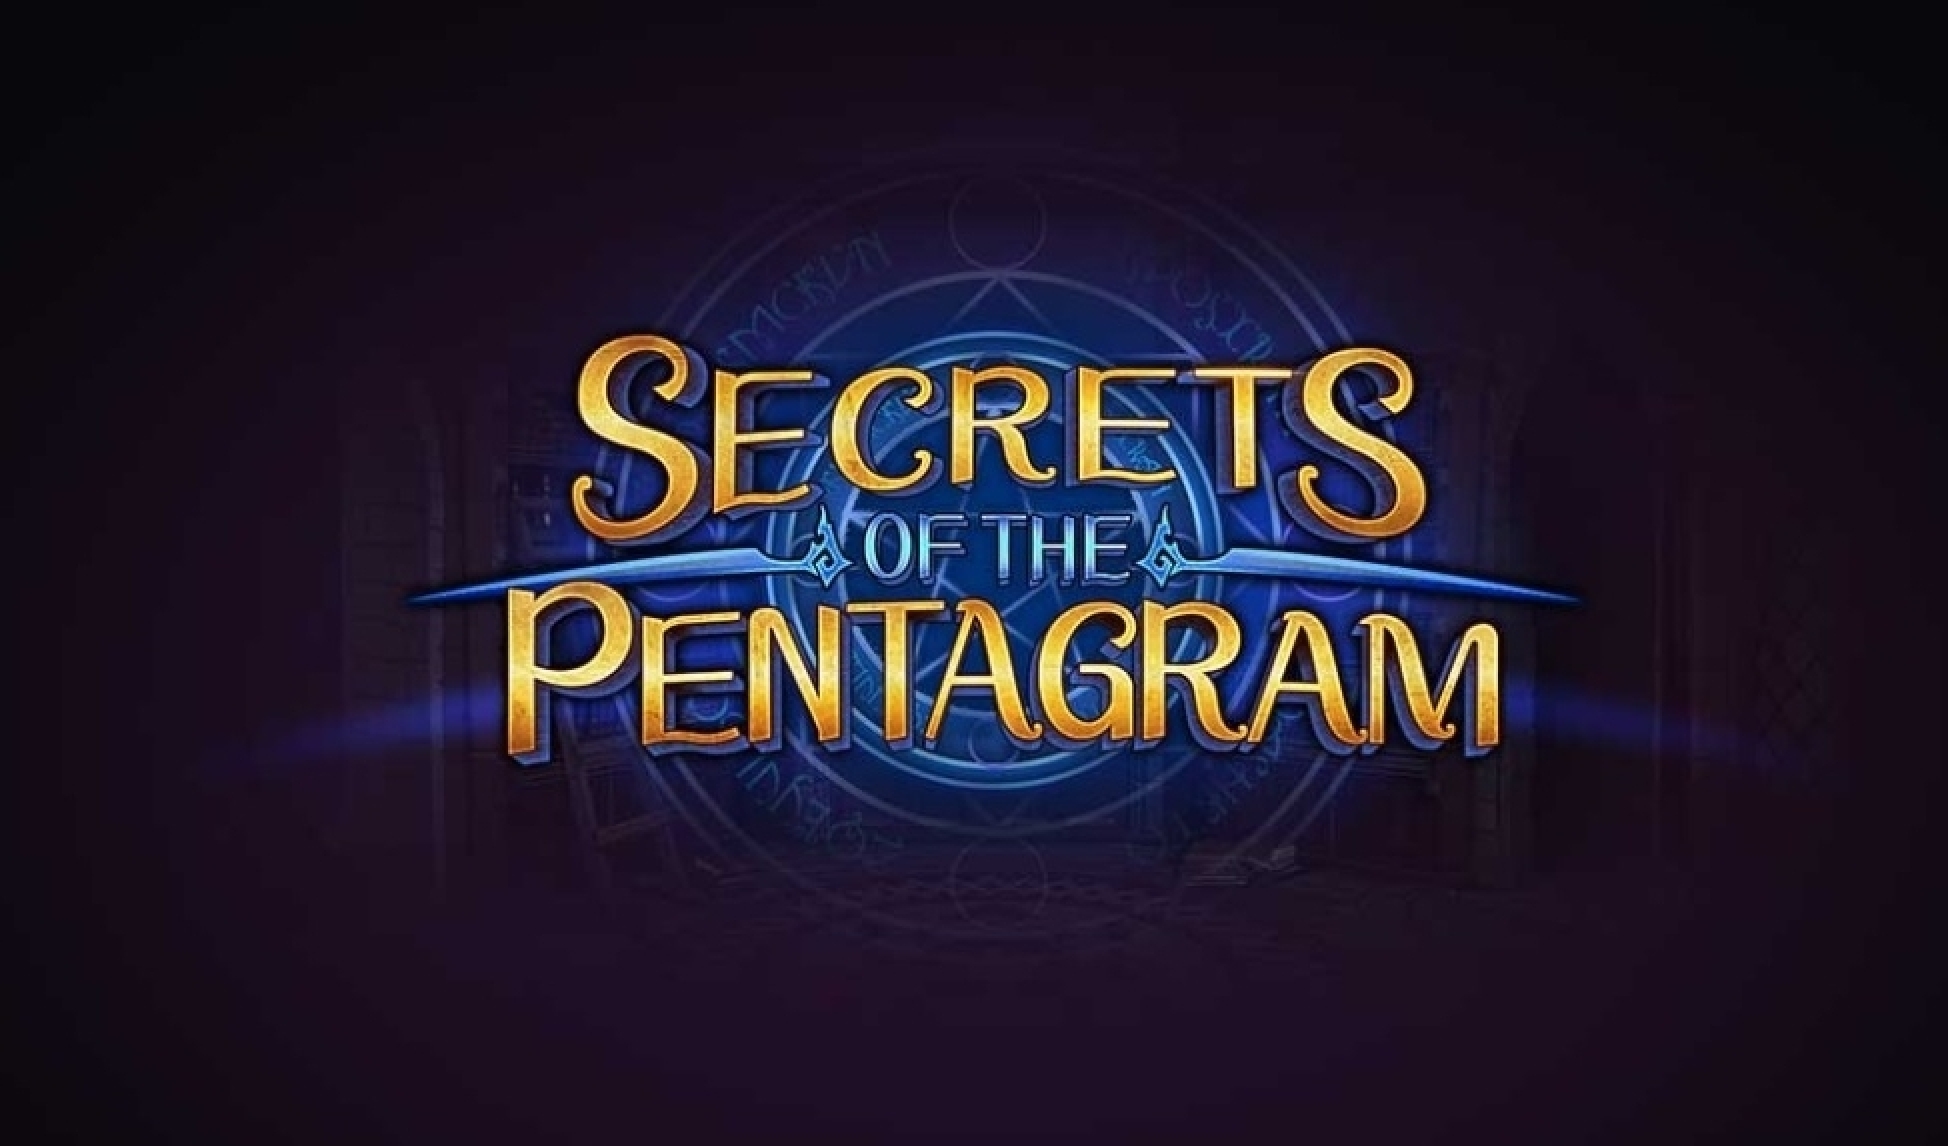 The Secrets of the Pentagram Online Slot Demo Game by Dreamtech Gaming